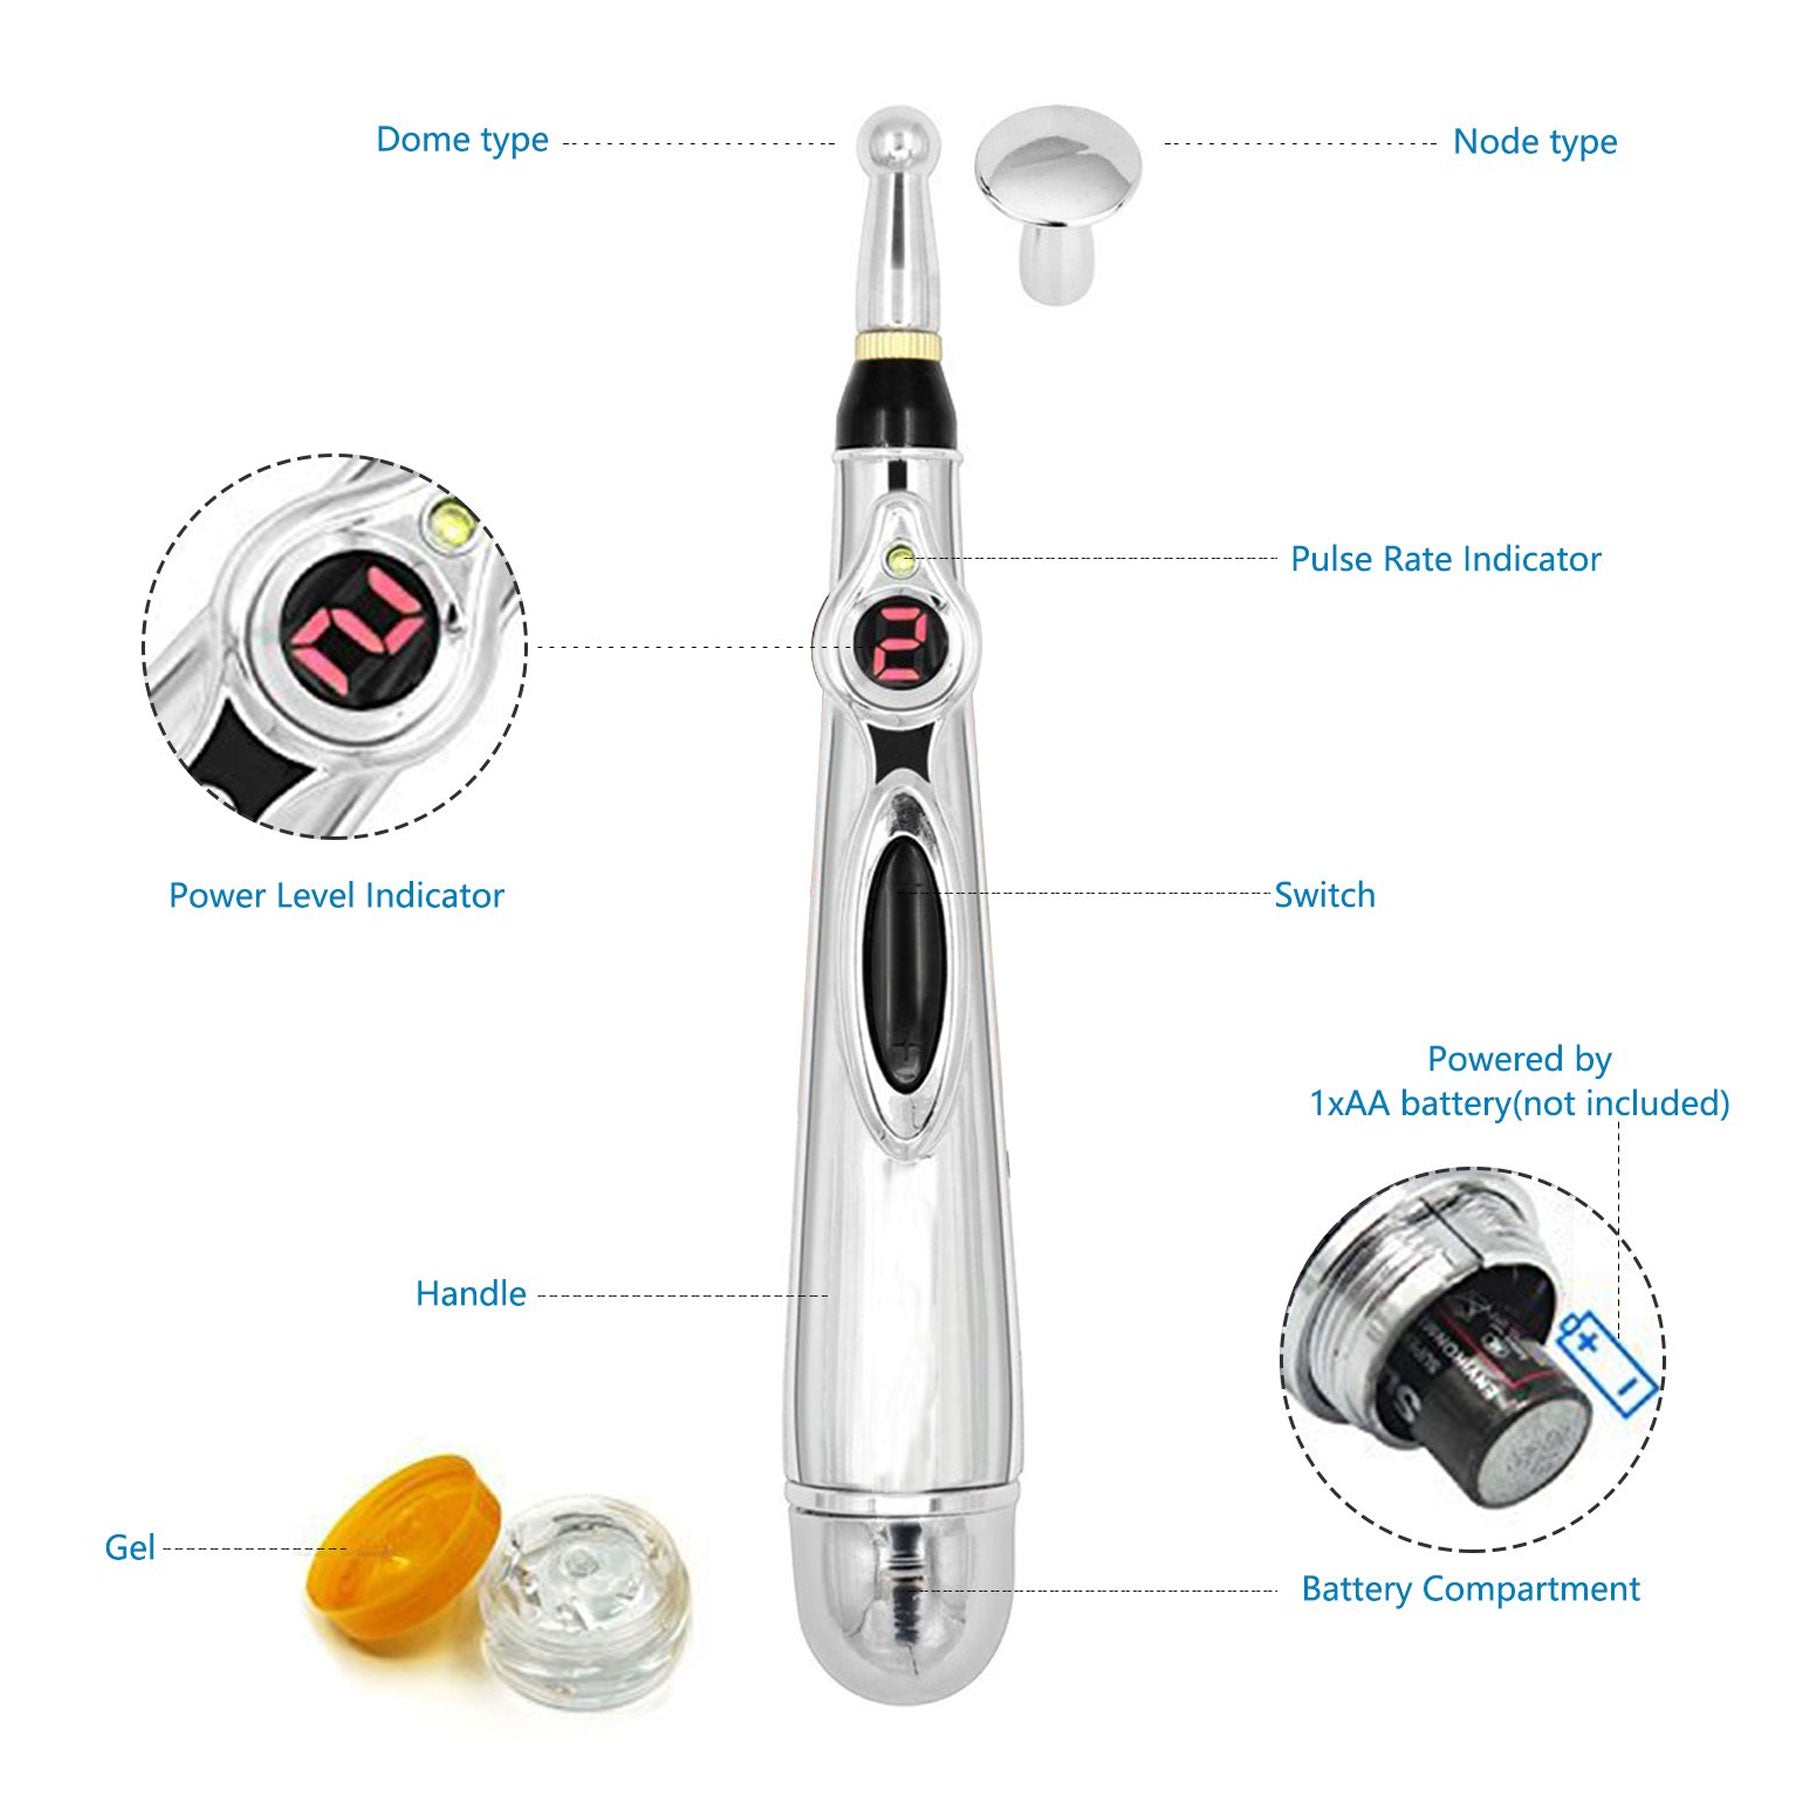 DF-618 Health And Beauty Pen Massager Theraphy